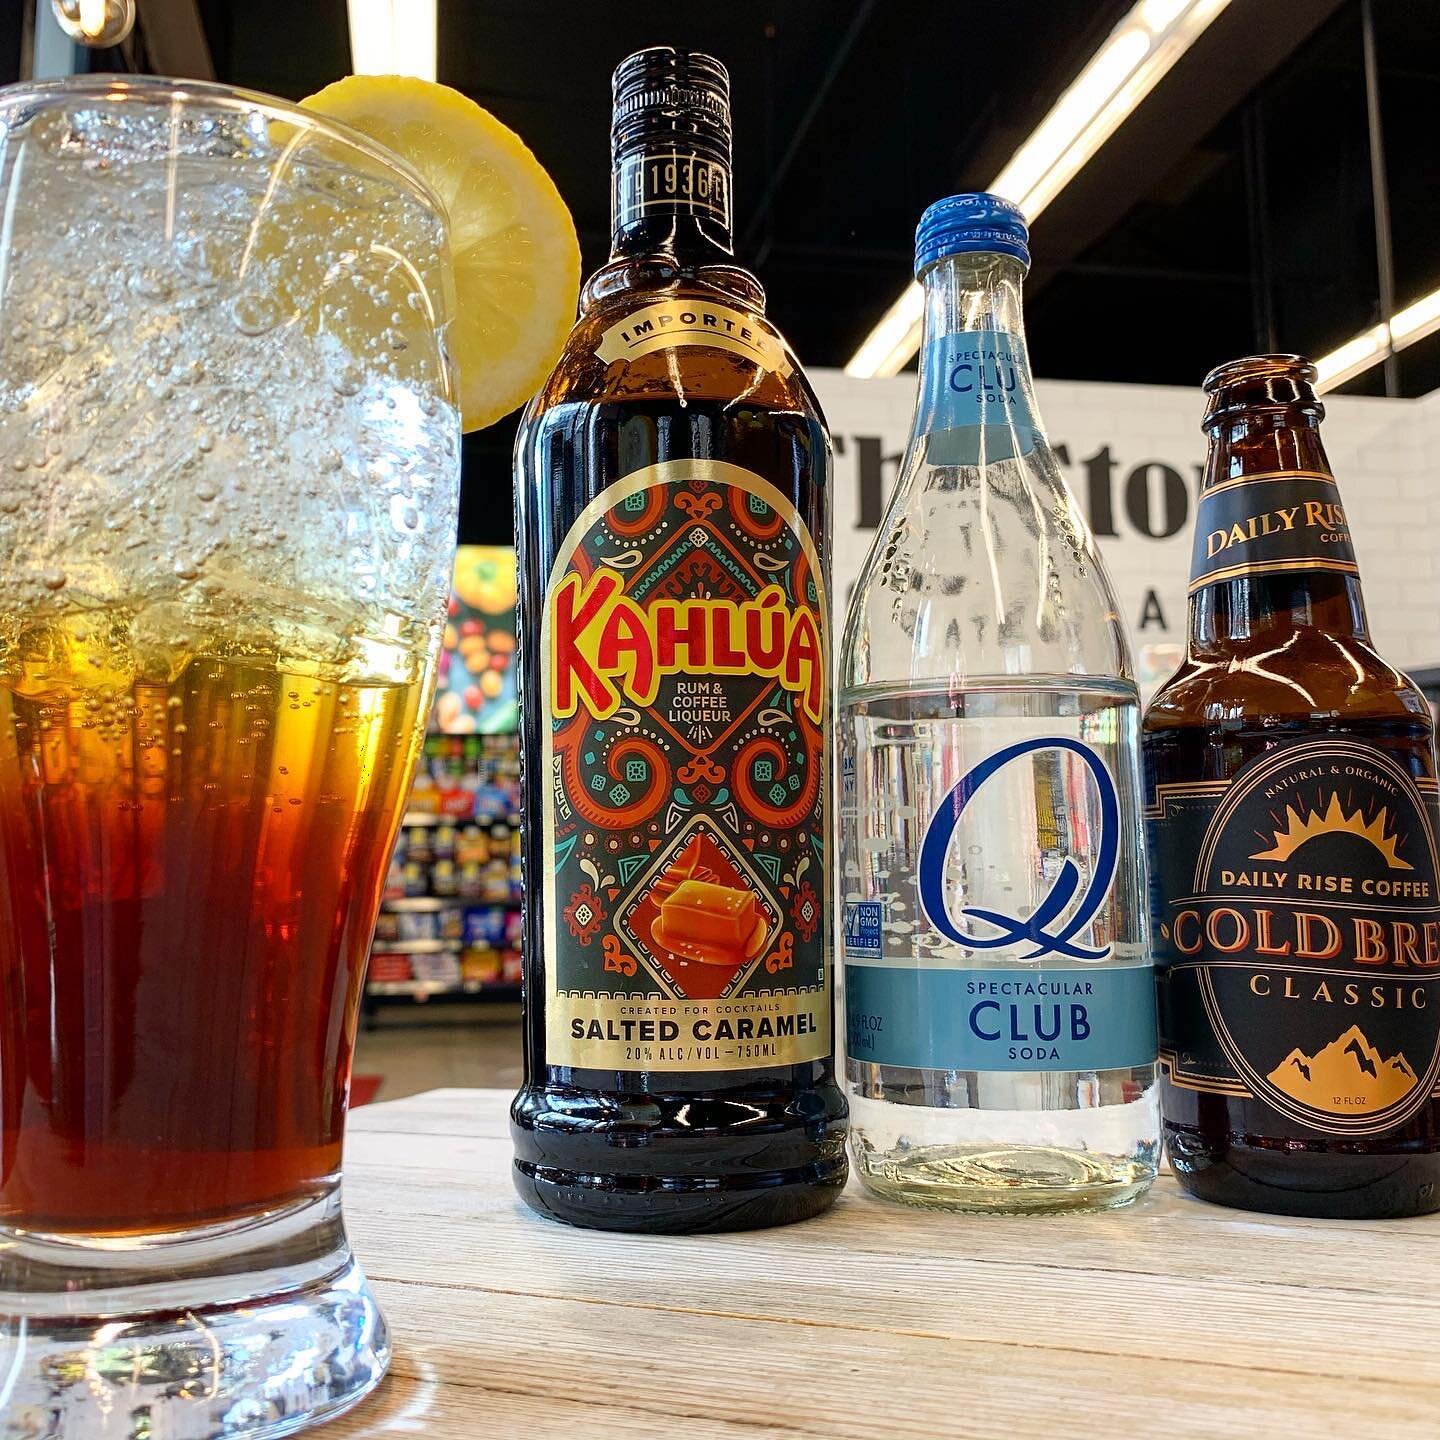 Kahl&uacute;a Cold Brew Soda🧋
_
Happy Thirsty Thursday! 
_

Today we mixed things up and created this beauty, a Kahlua Cold Brew Soda! 
_
Ingredients: 
_
1 1/2oz Kahlua
_
Half a cup of Cold Brew Coffee @dailyrisecoffee 
_
Top off the drink with a lo